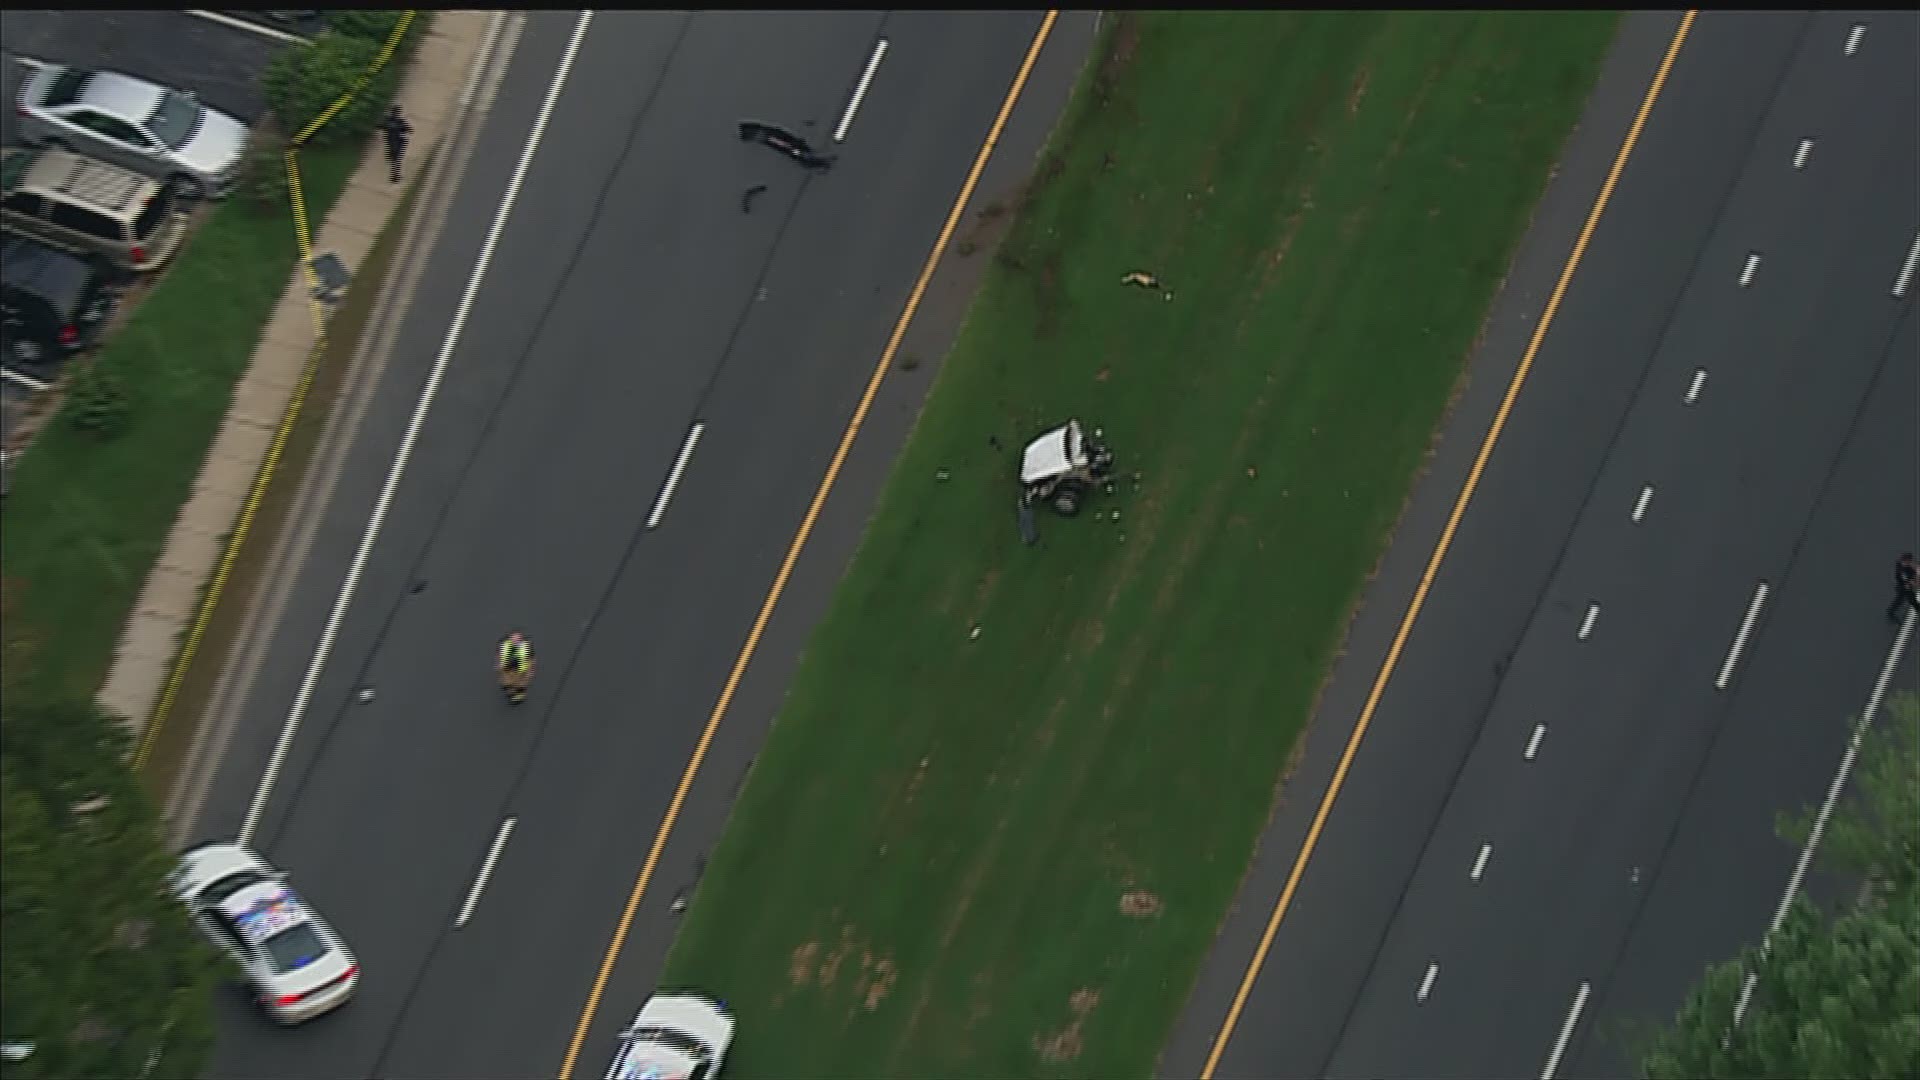 Investigators believe speeding may have been the cause of the deadly crash in Gaithersburg.